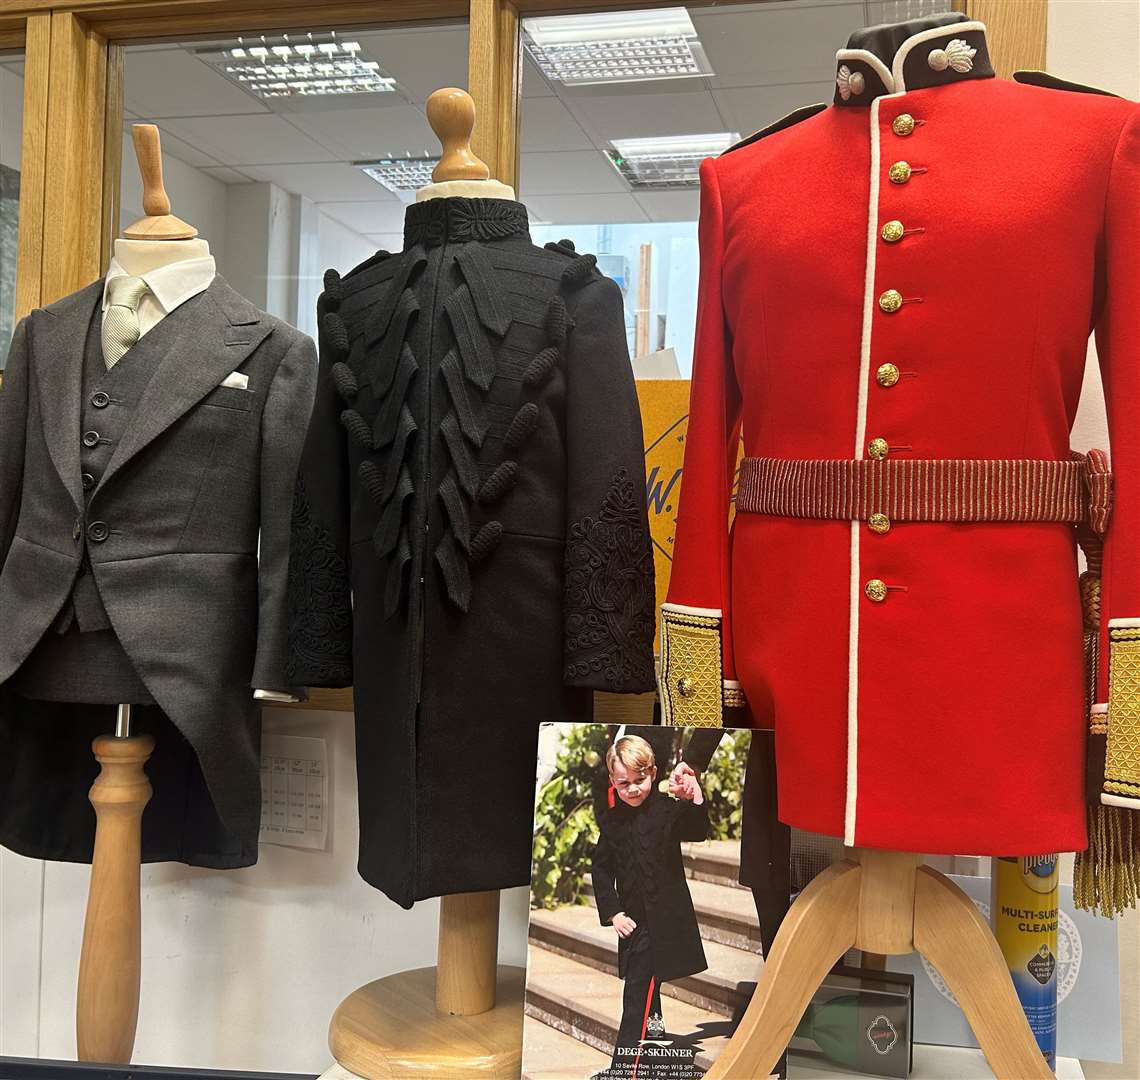 An elaborate tunic (centre) worn by Prince George when he was a page boy at Prince Harry and Meghan Markle's wedding in 2018